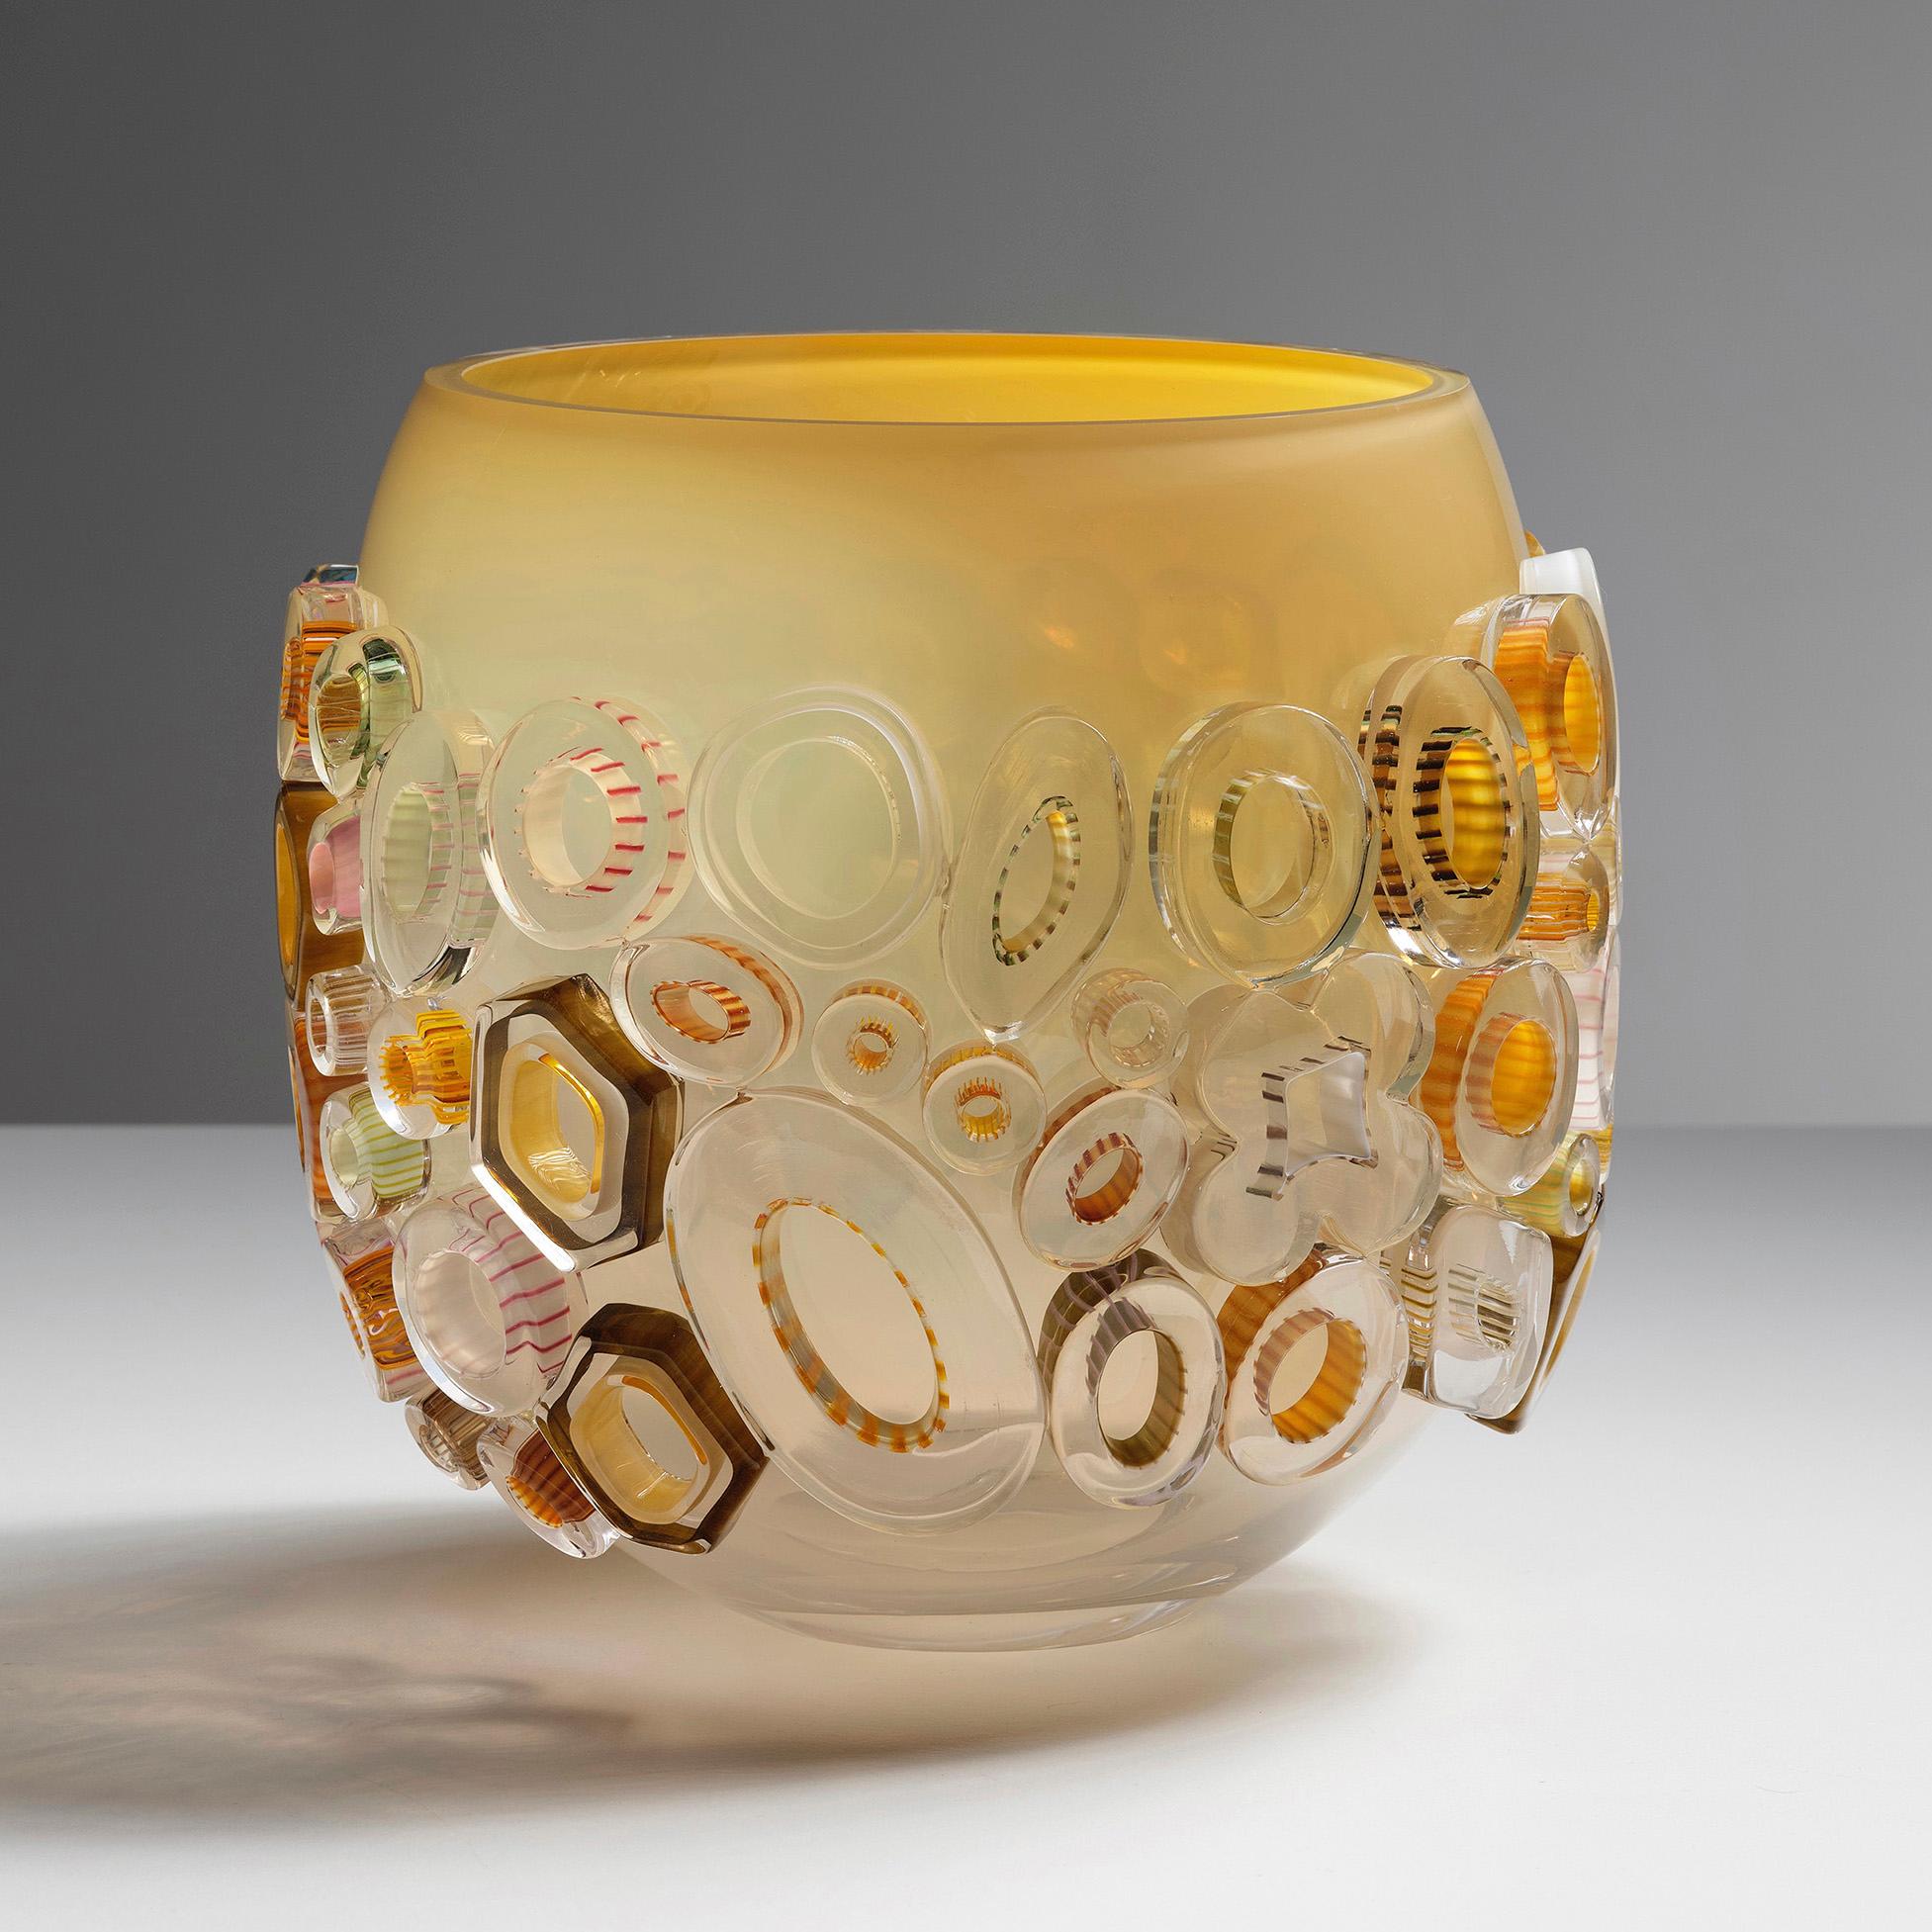 Organic Modern Common Ray Honey Caramel, a Unique Yellow Glass Centrepiece by Sabine Lintzen For Sale